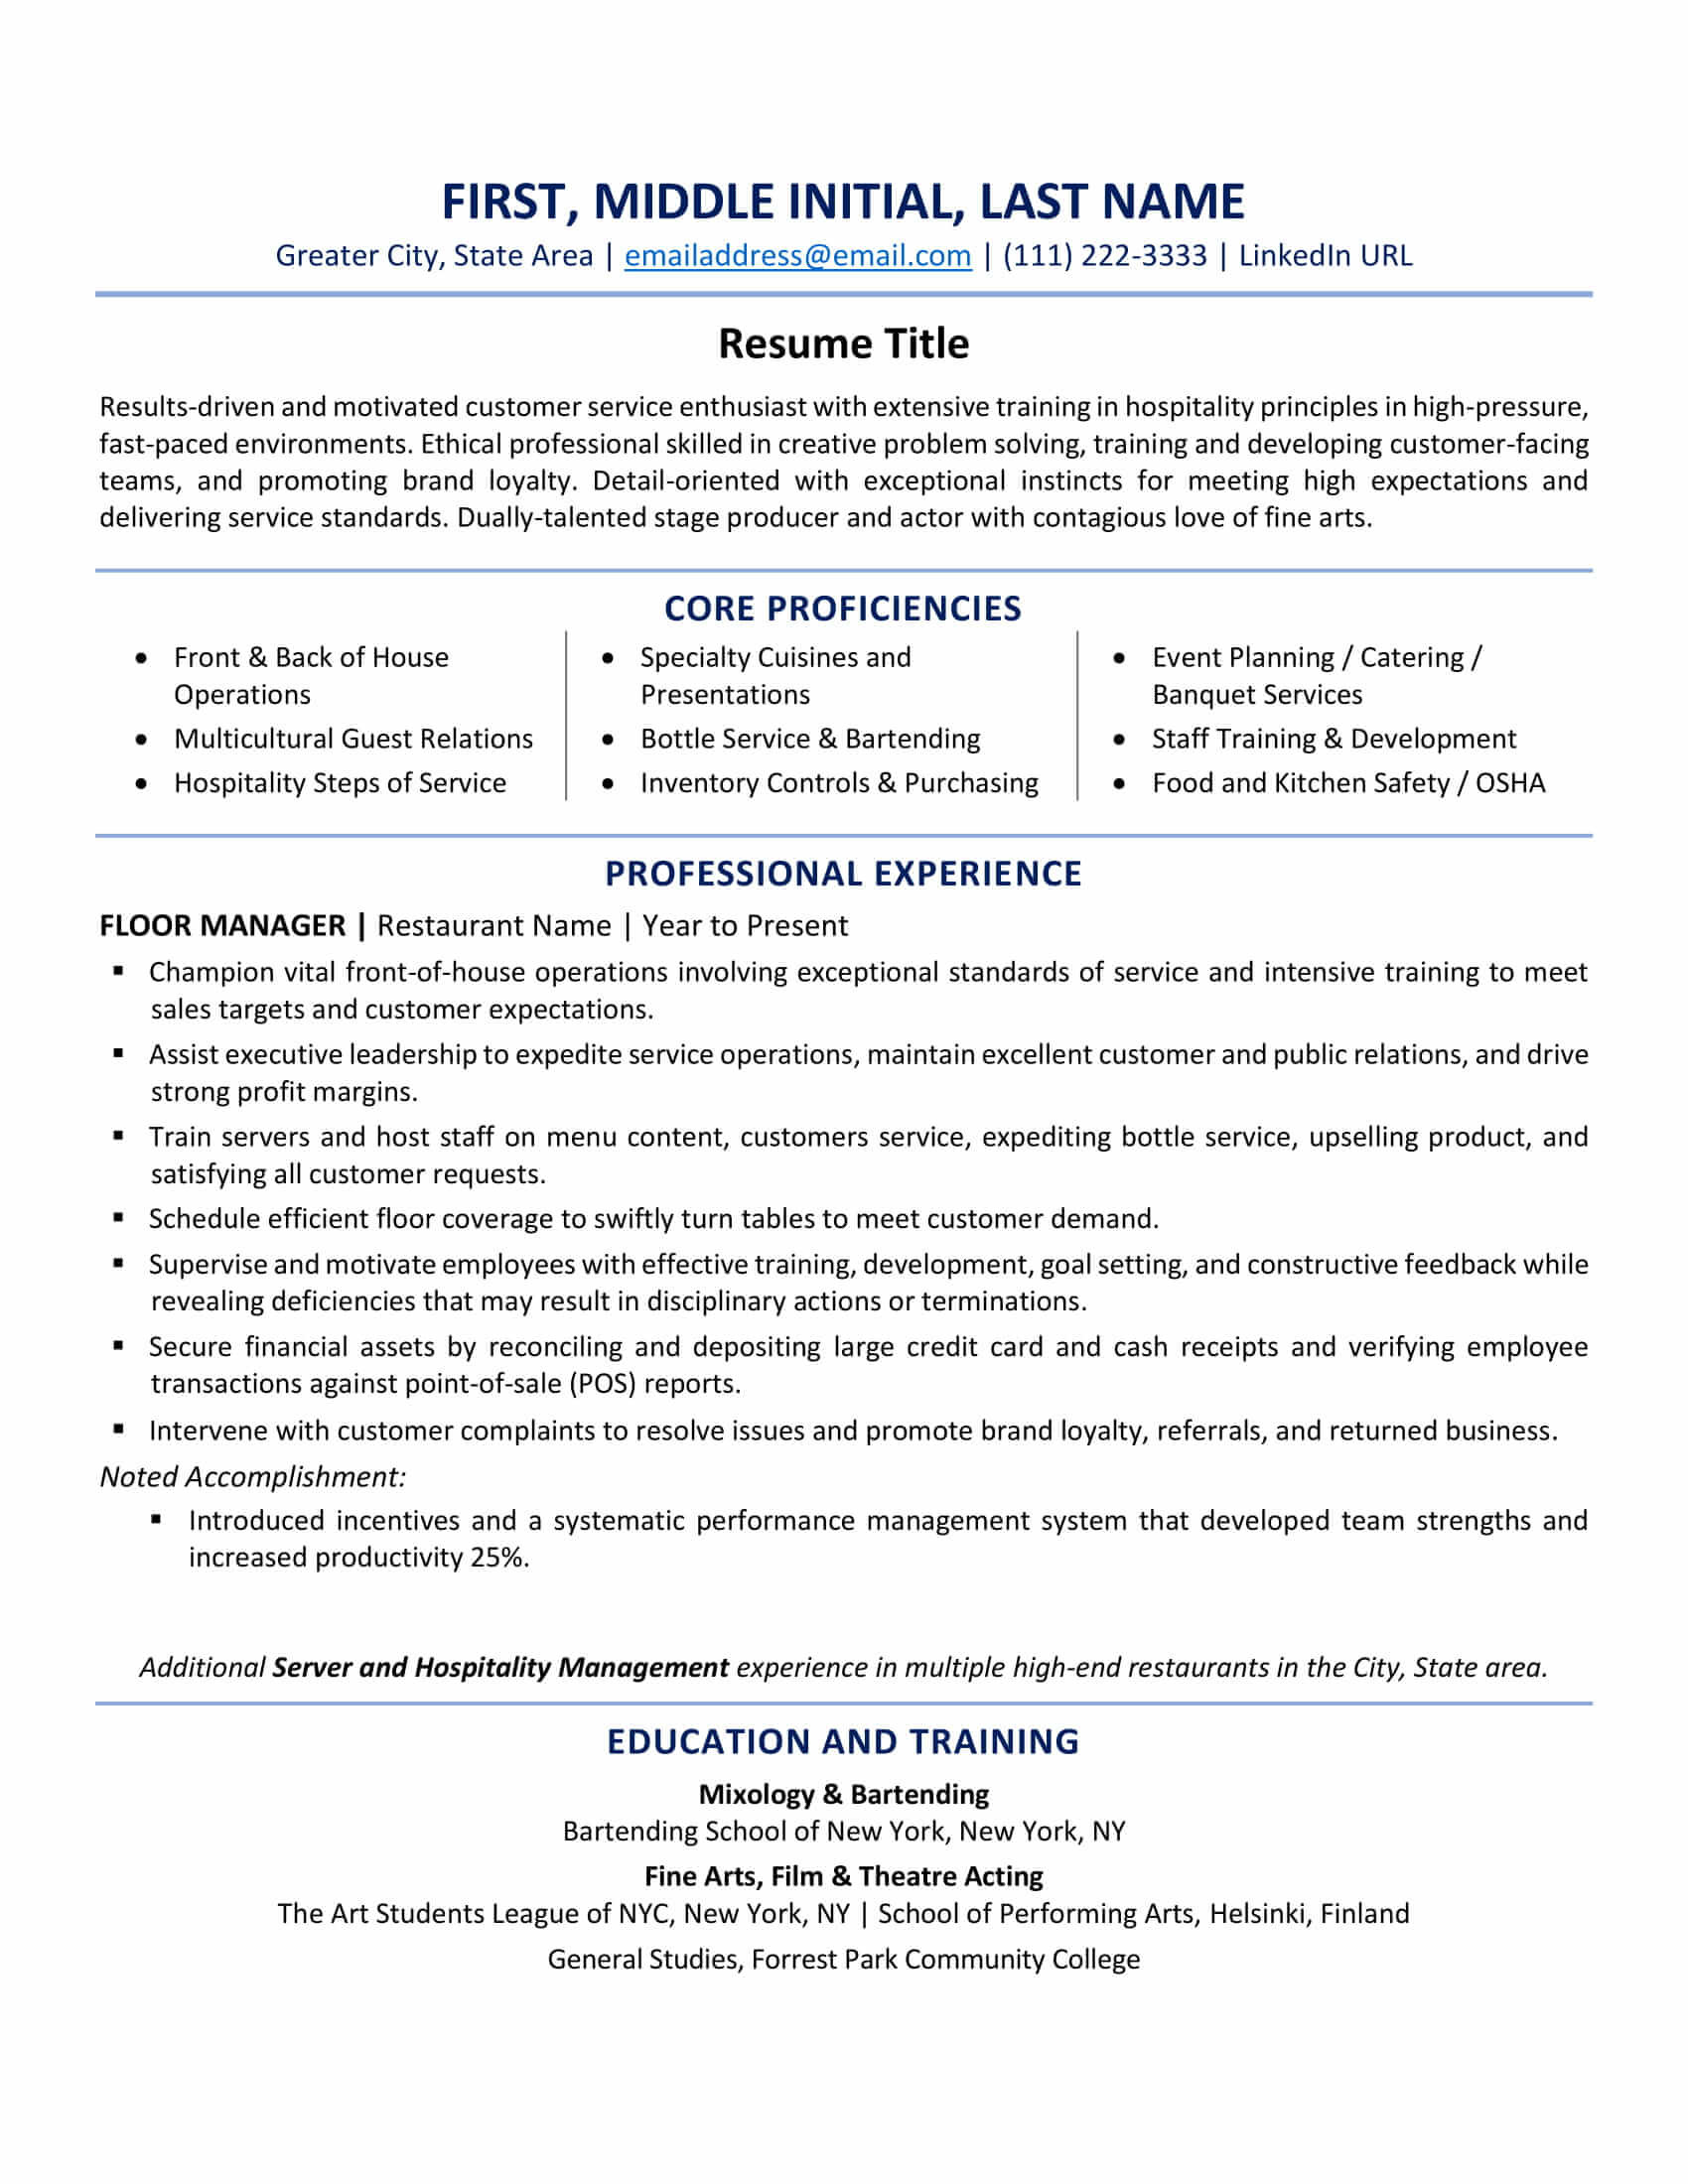 Sample Resumes for People Returning to Work 7 No-fail Resume Tips for Older Workers (lancarrezekiq Examples) Zipjob